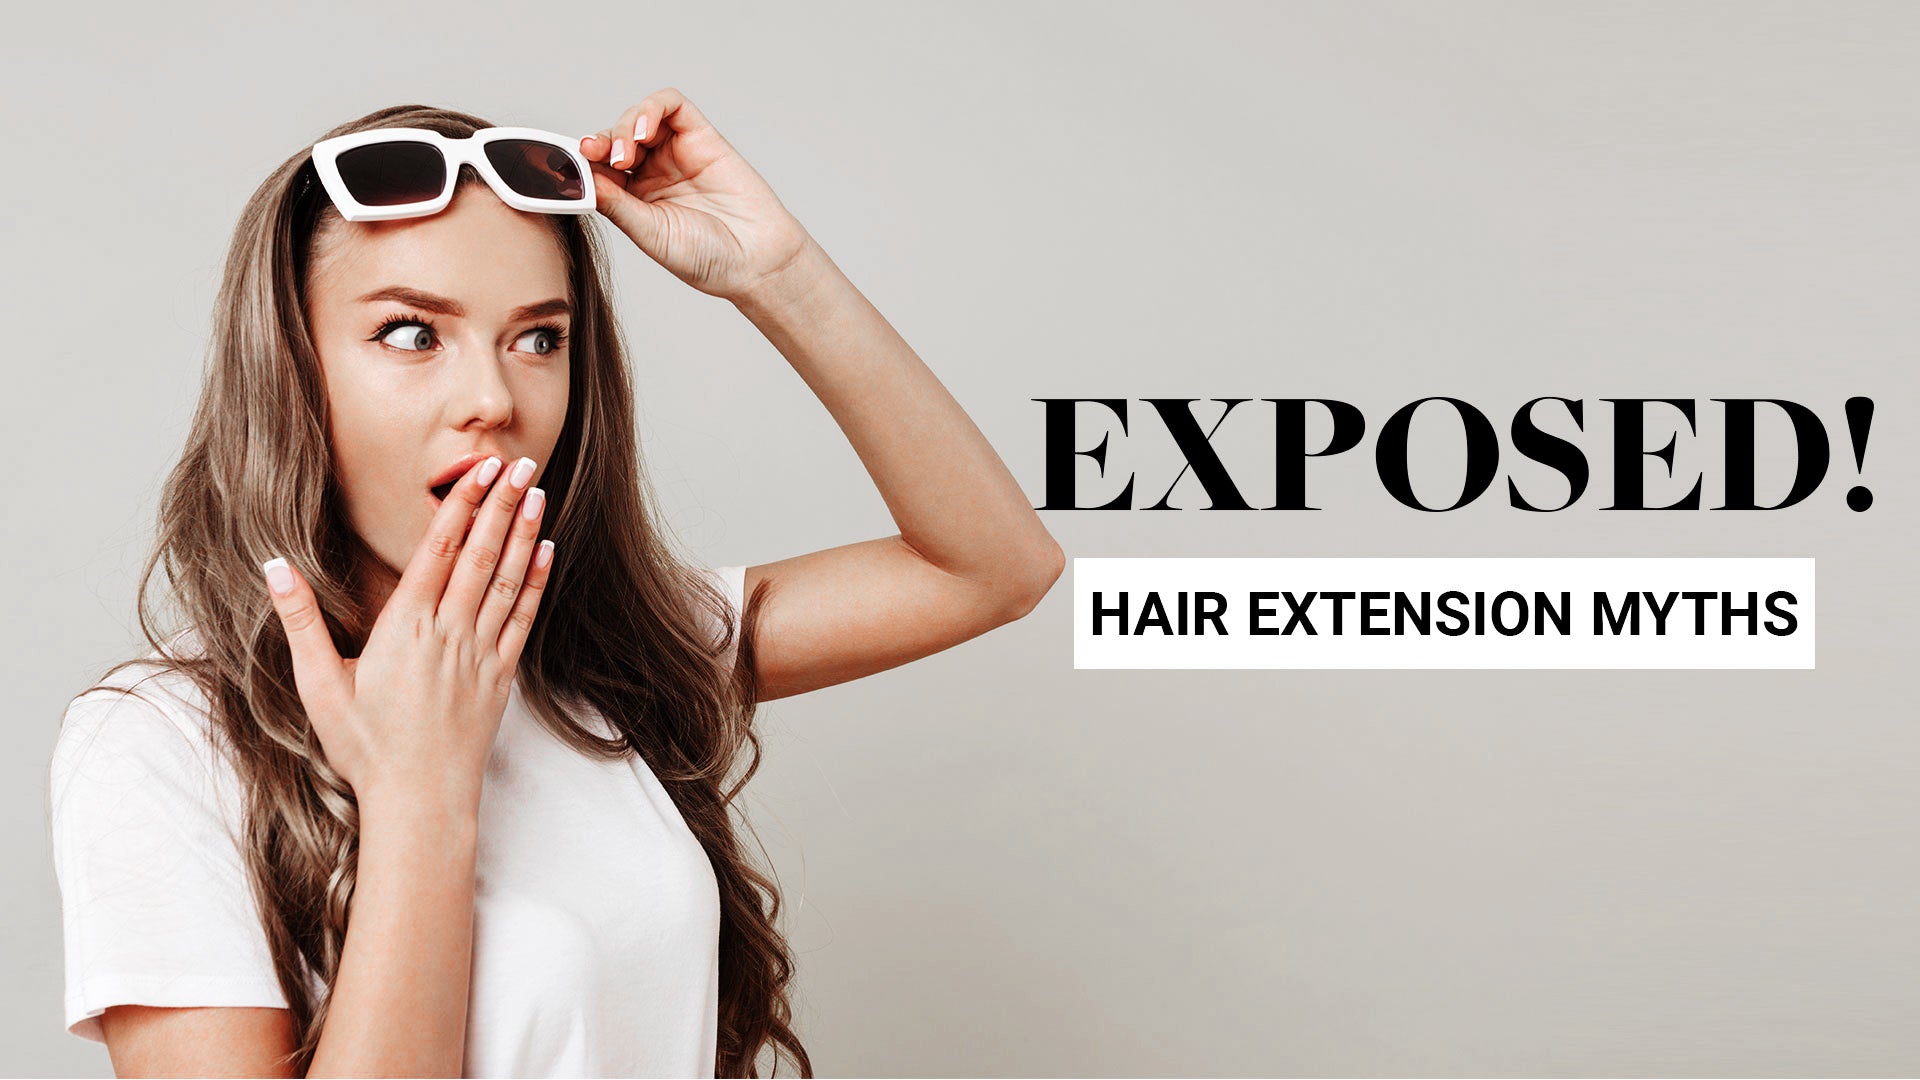 EXPOSED! HAIR EXTENSION MYTHS.